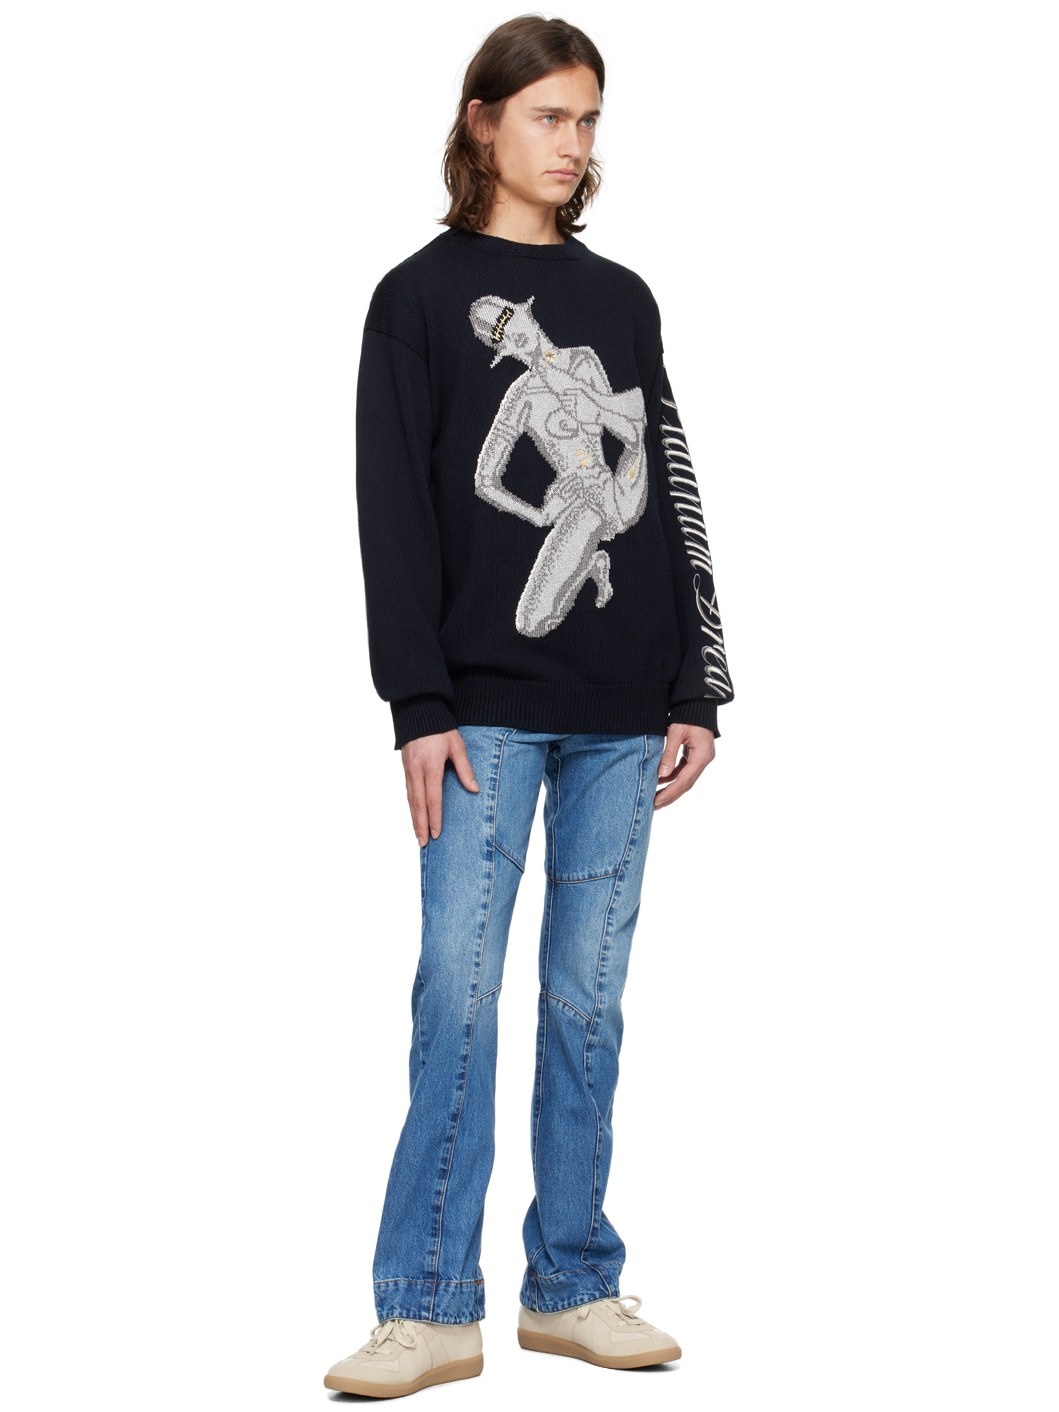 Black Embroidered Sweater - 4